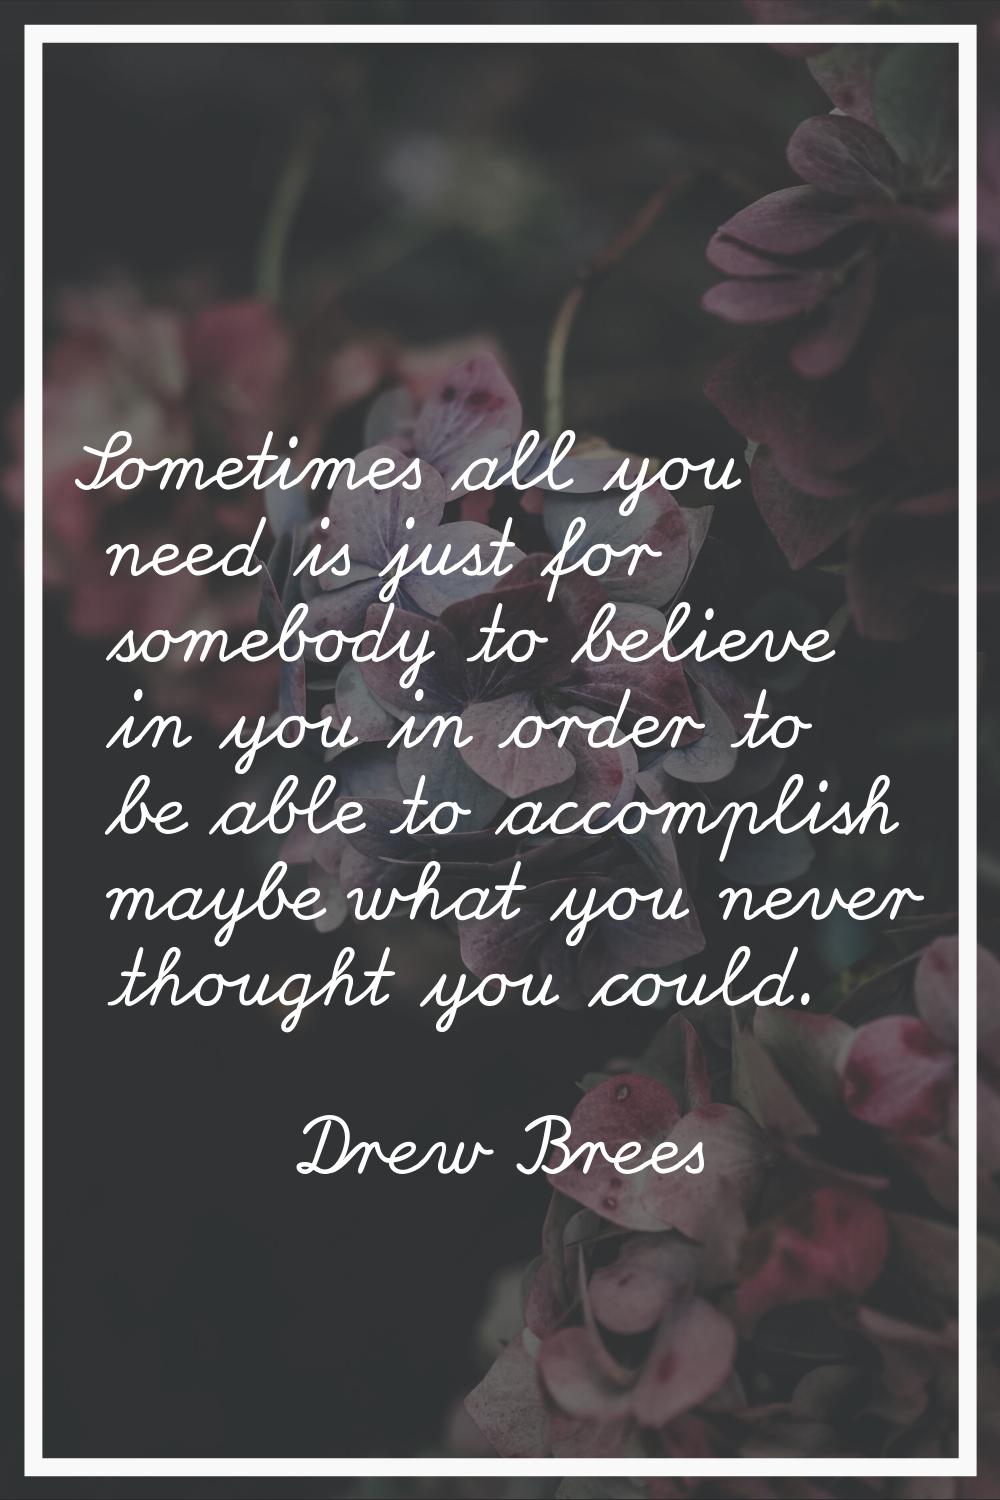 Sometimes all you need is just for somebody to believe in you in order to be able to accomplish may